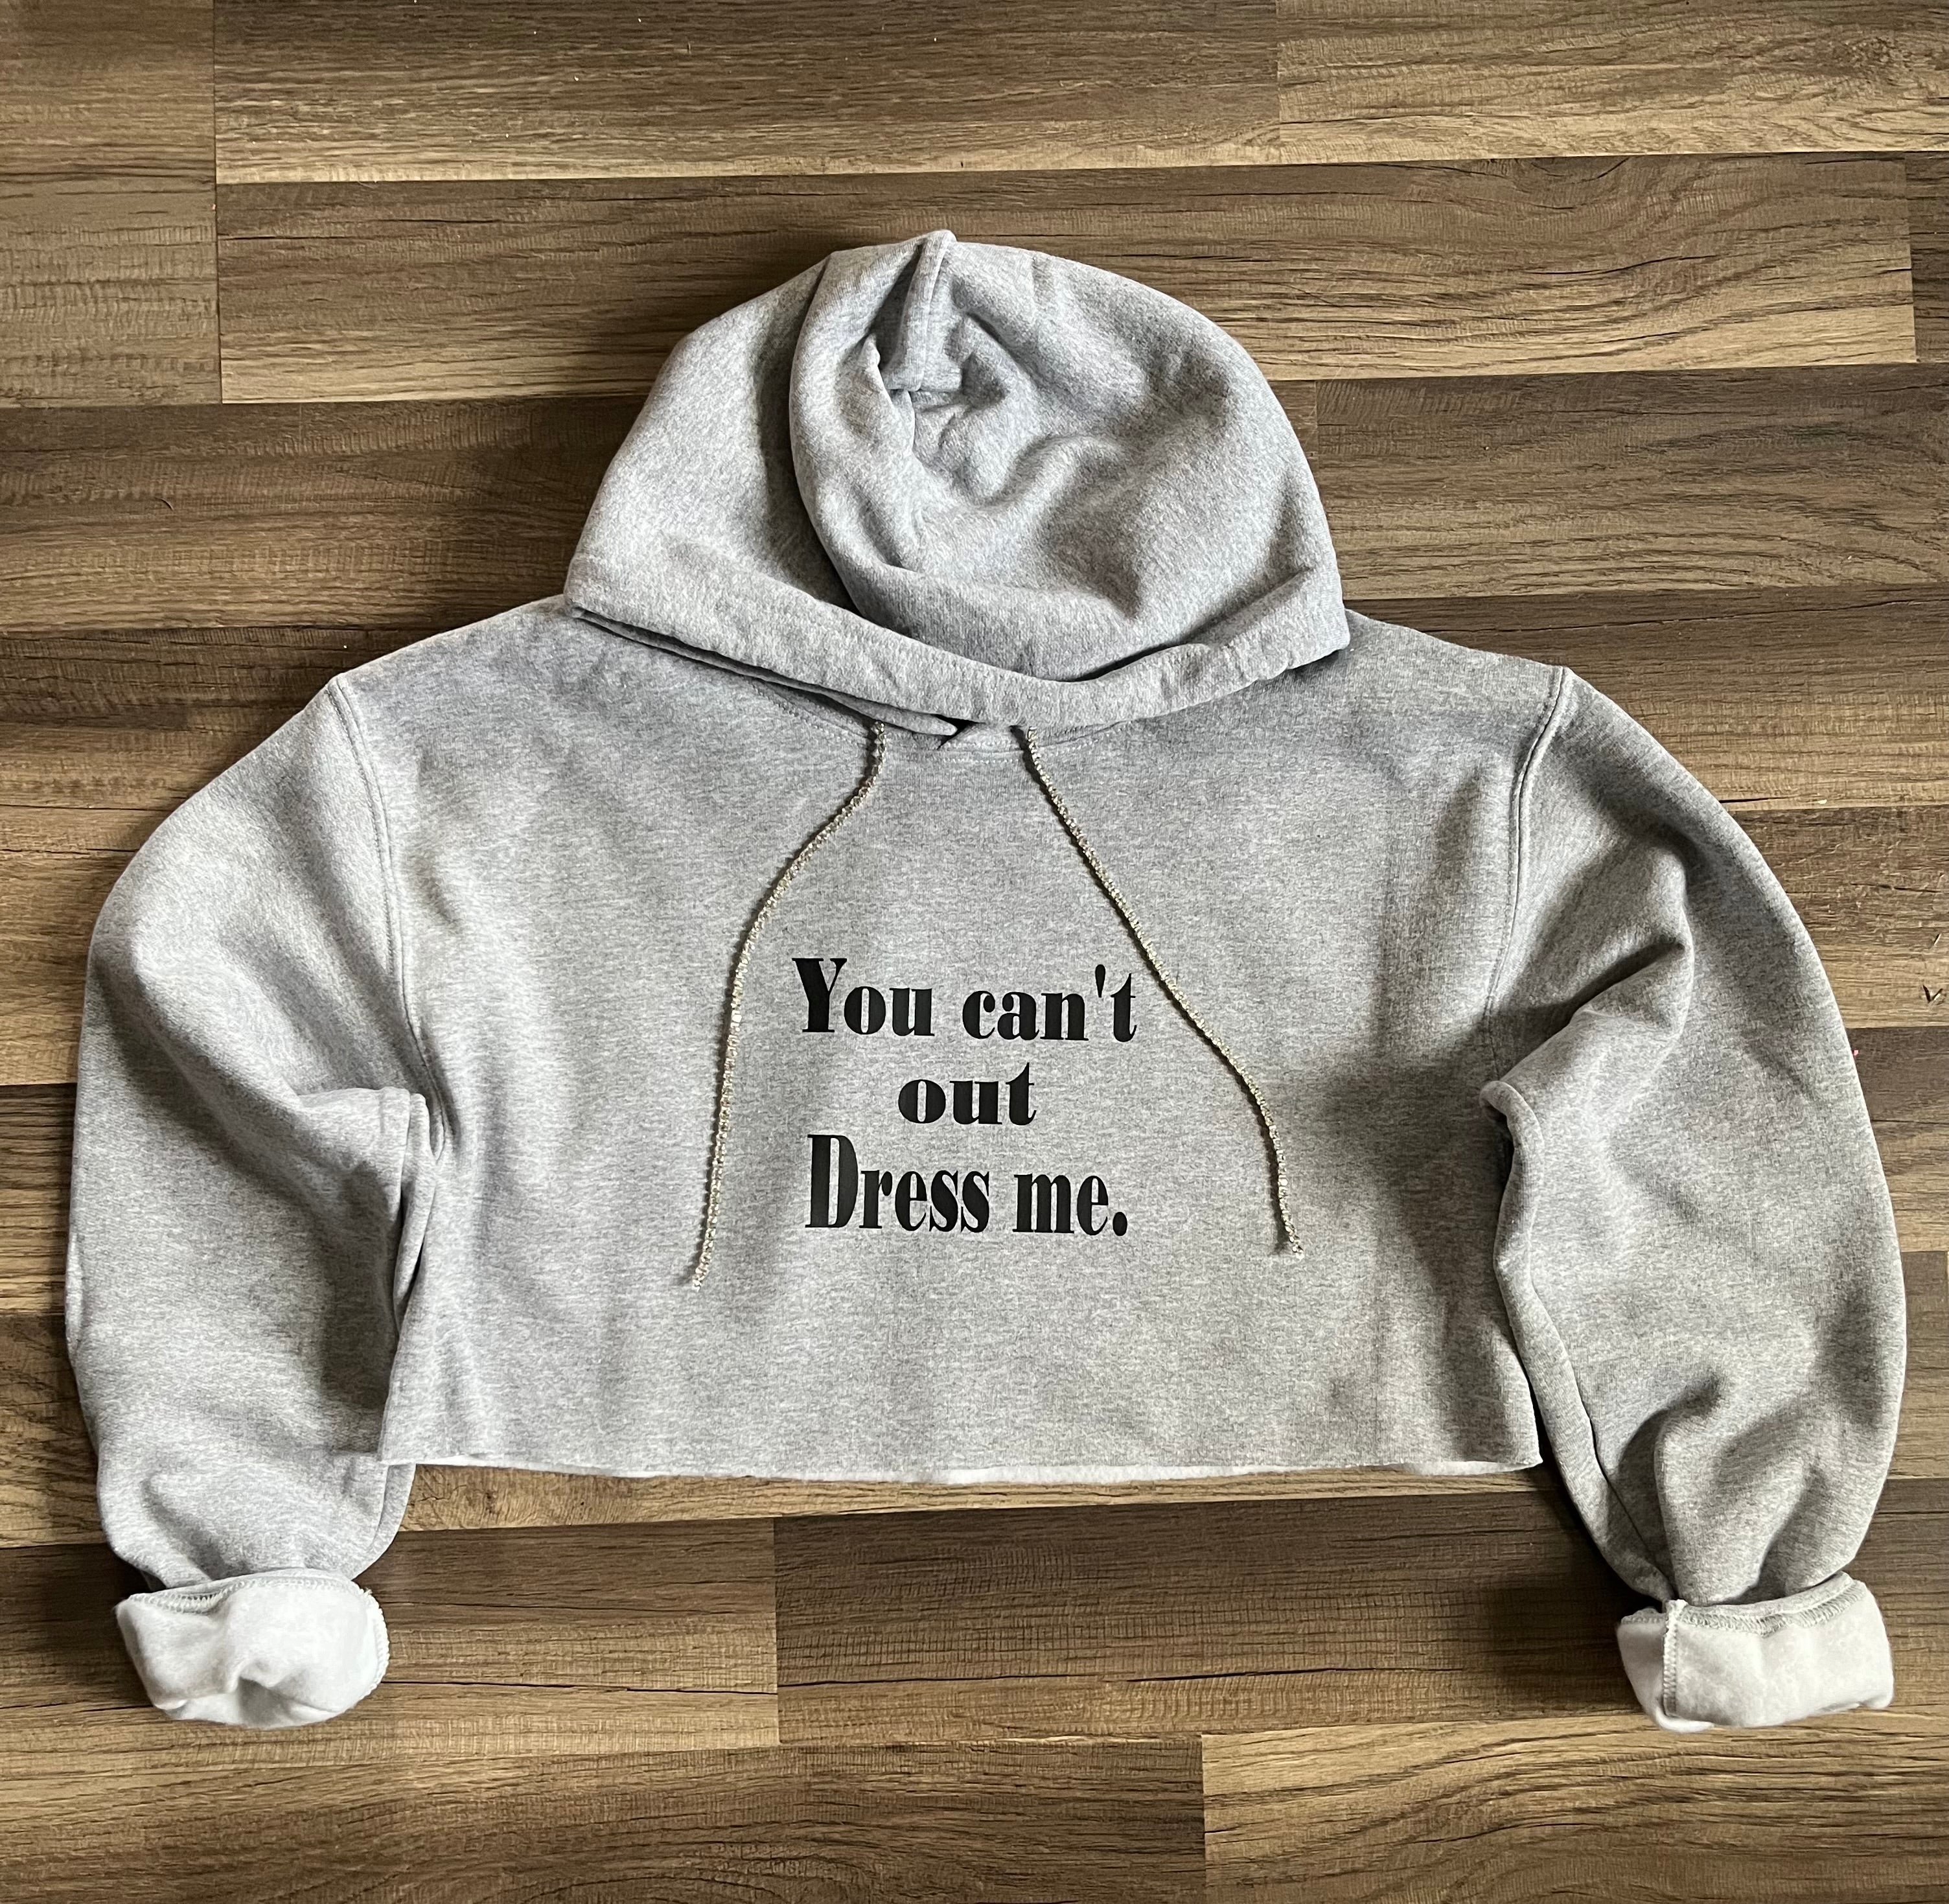 You can’t out dress me.